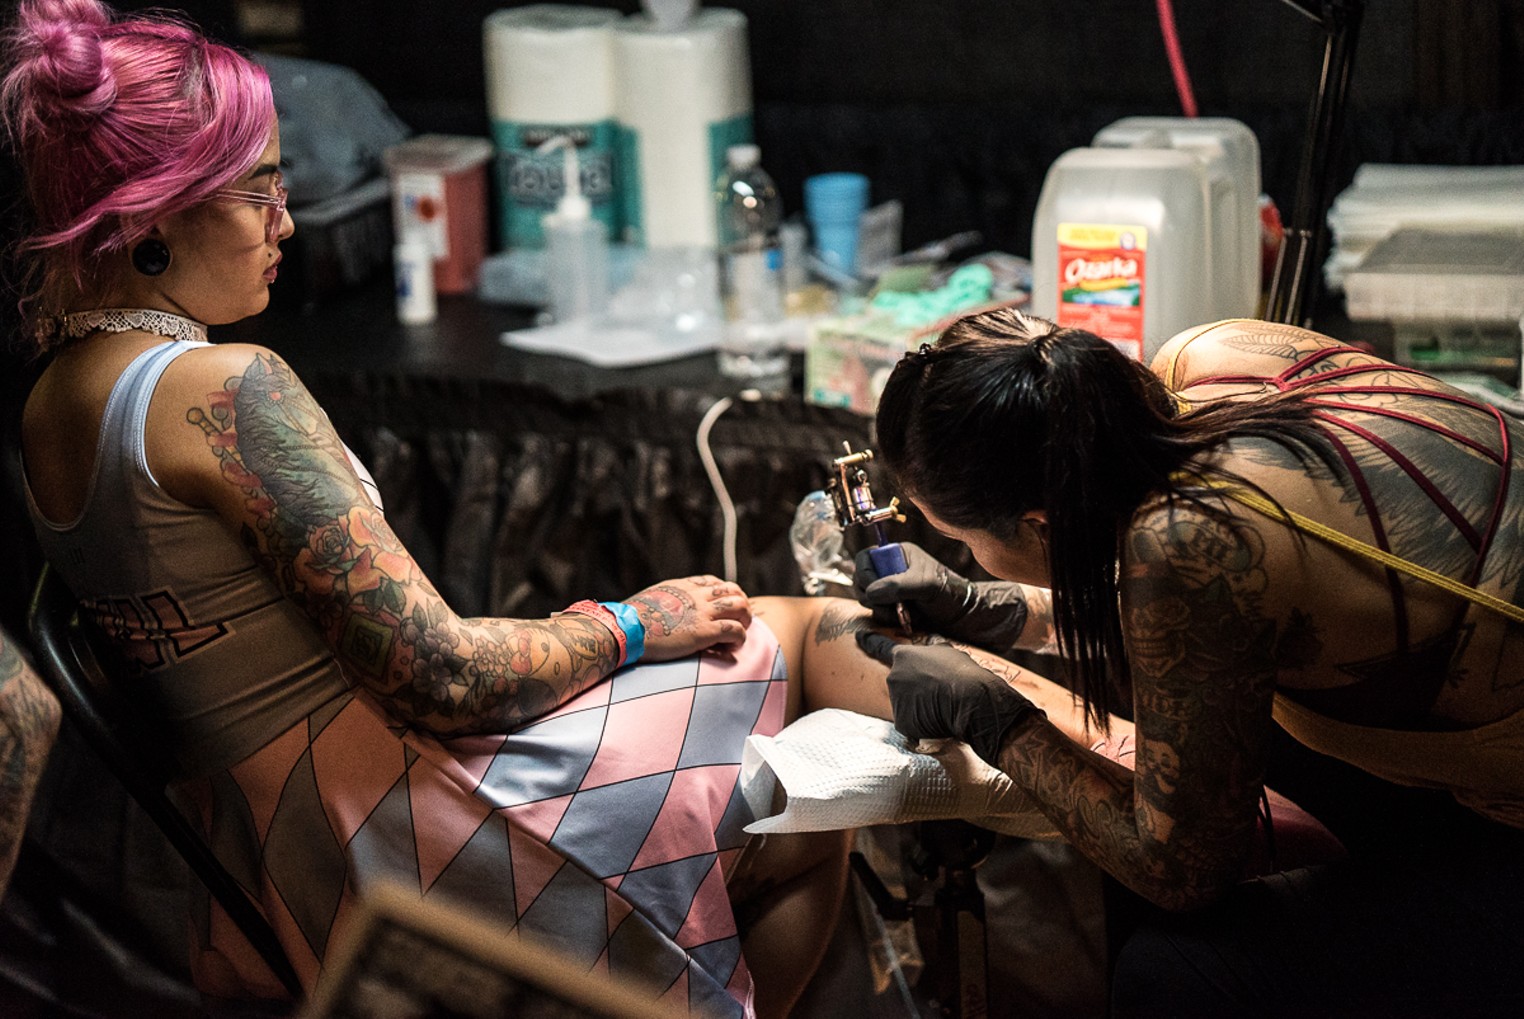 Tattoo uploaded by Jessica Paige  Greg Christian in action at Oliver  Pecks Elm Street Music and Tattoo Festival 2017  Dallas TX Photo  Jessica Paige IG  gregchristian4130 GregChristian TattooFaction  ElmStFest  Tattoodo